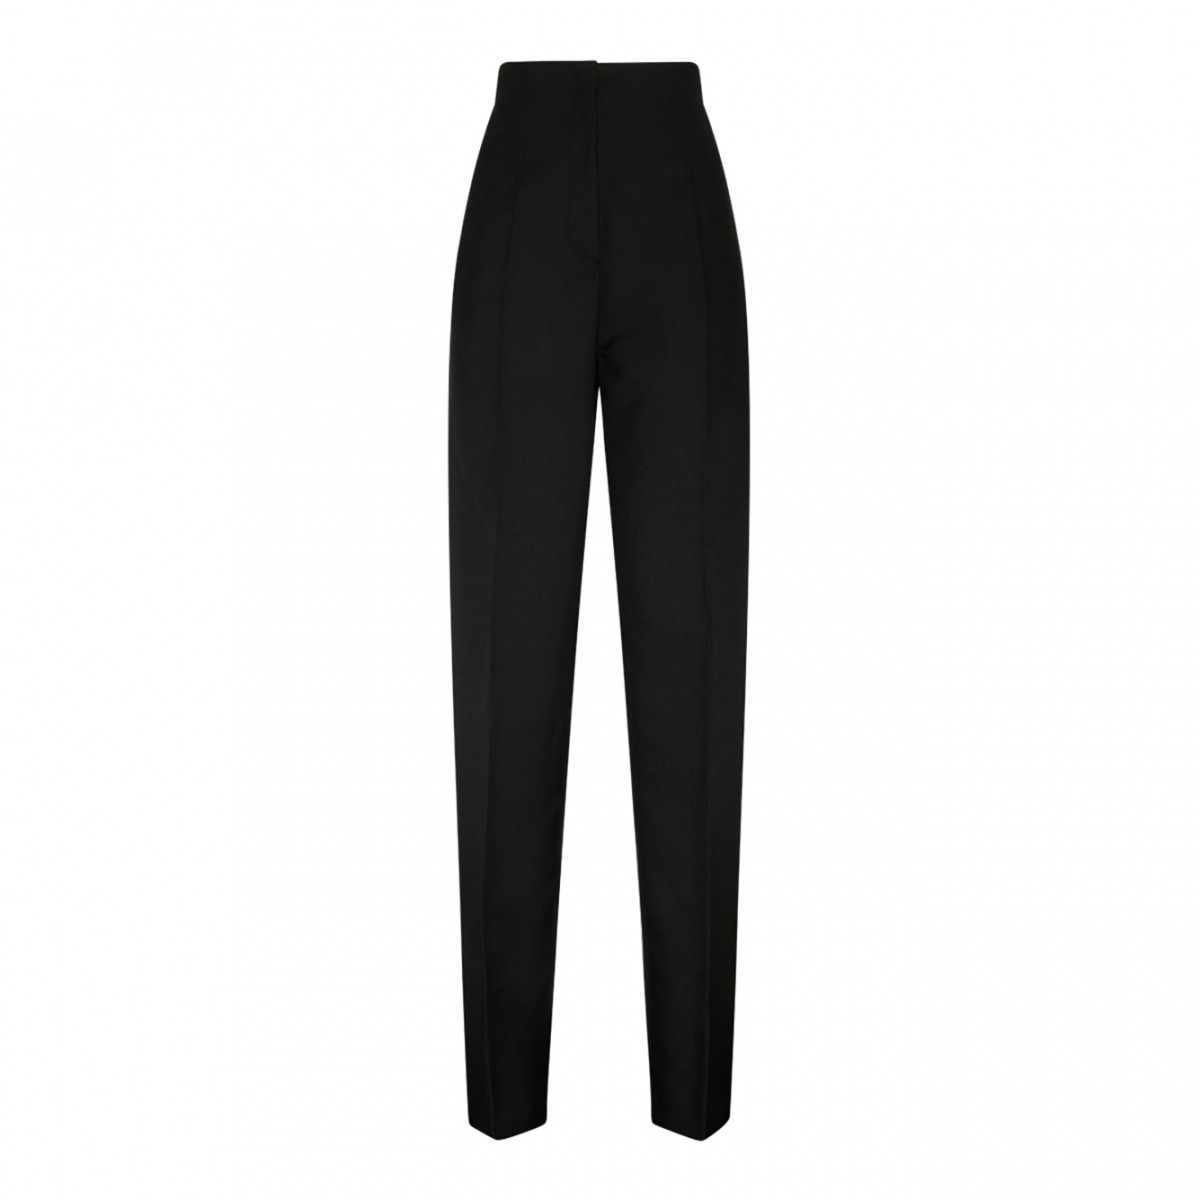 Women's Umanita Cropped Trousers by 's Max Mara | Coltorti Boutique